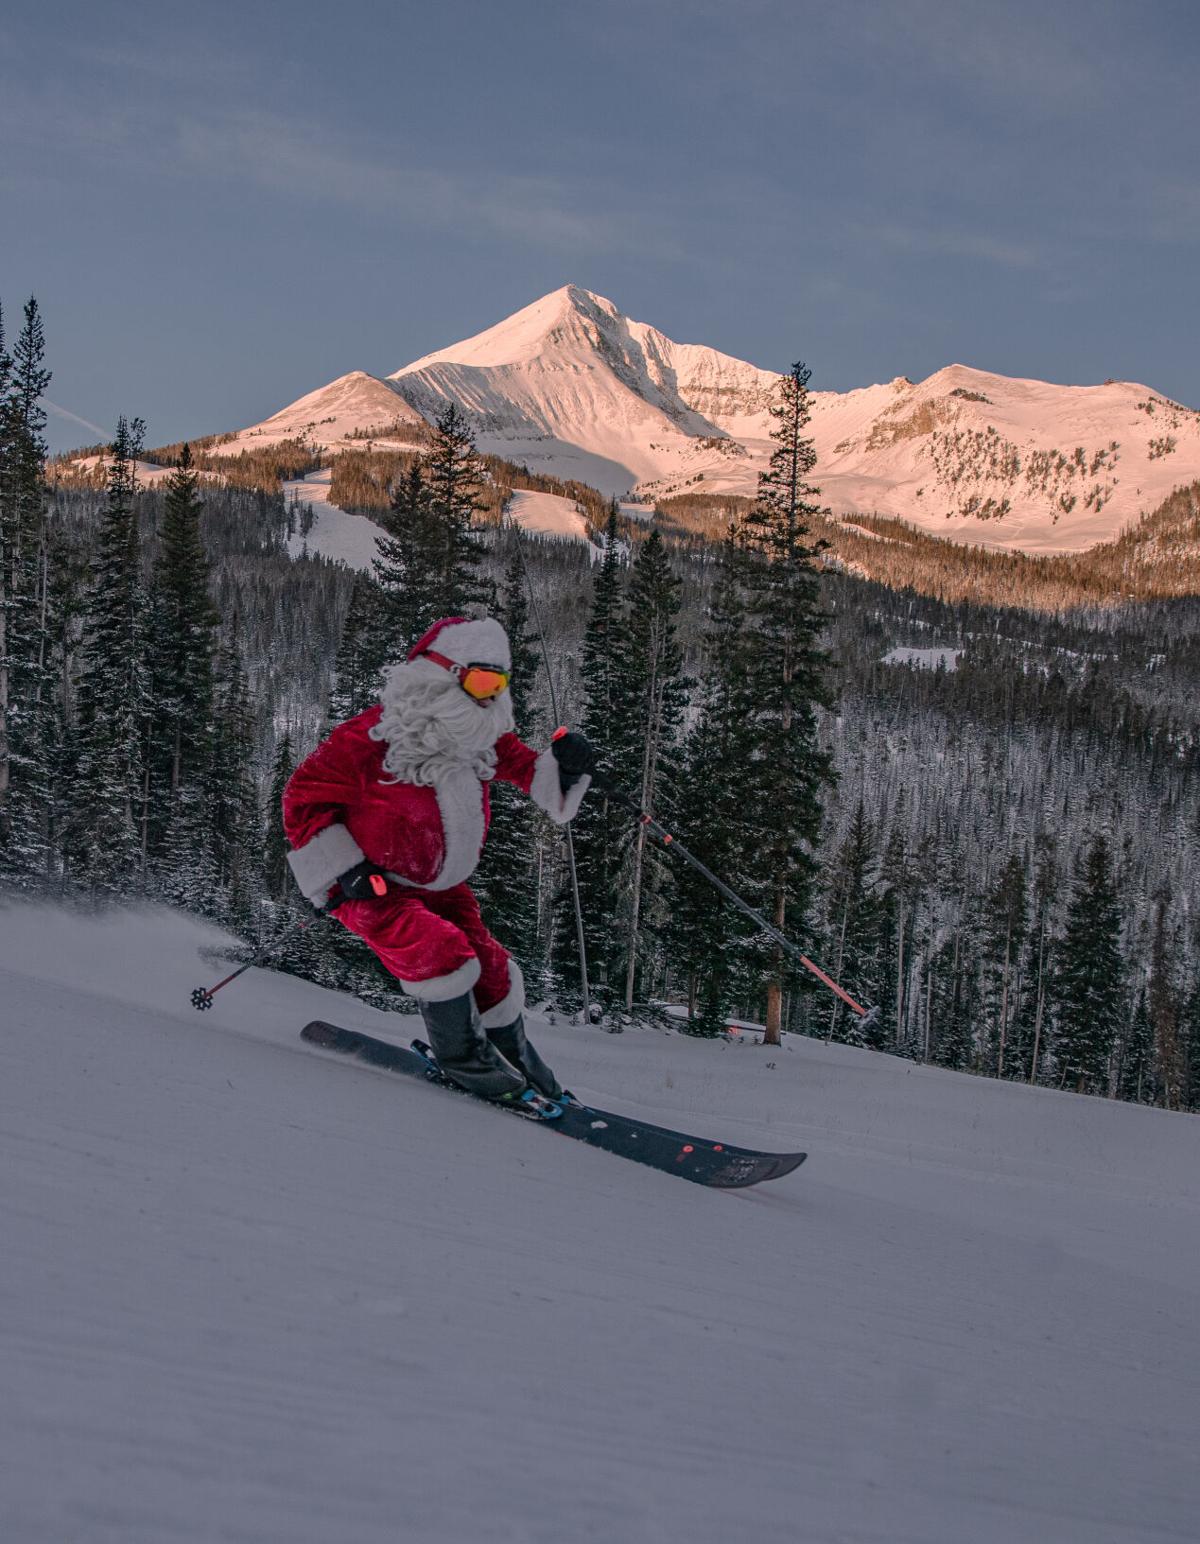 Big Sky Resort Christmas celebration and tips to avoid lift ticket headaches